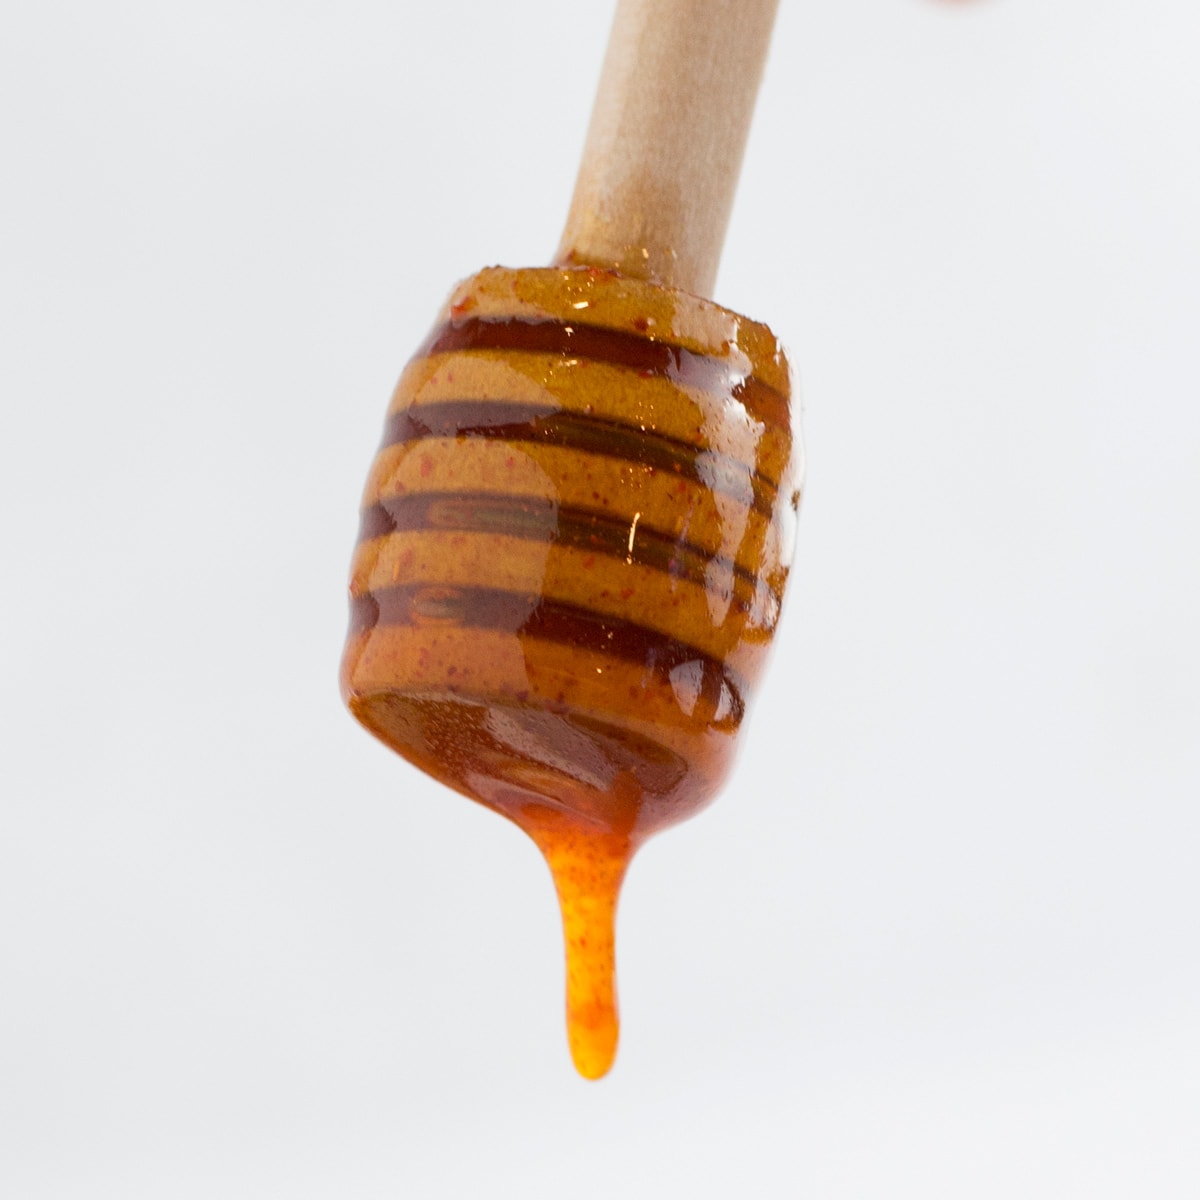 Spicy honey dripping off dipper.